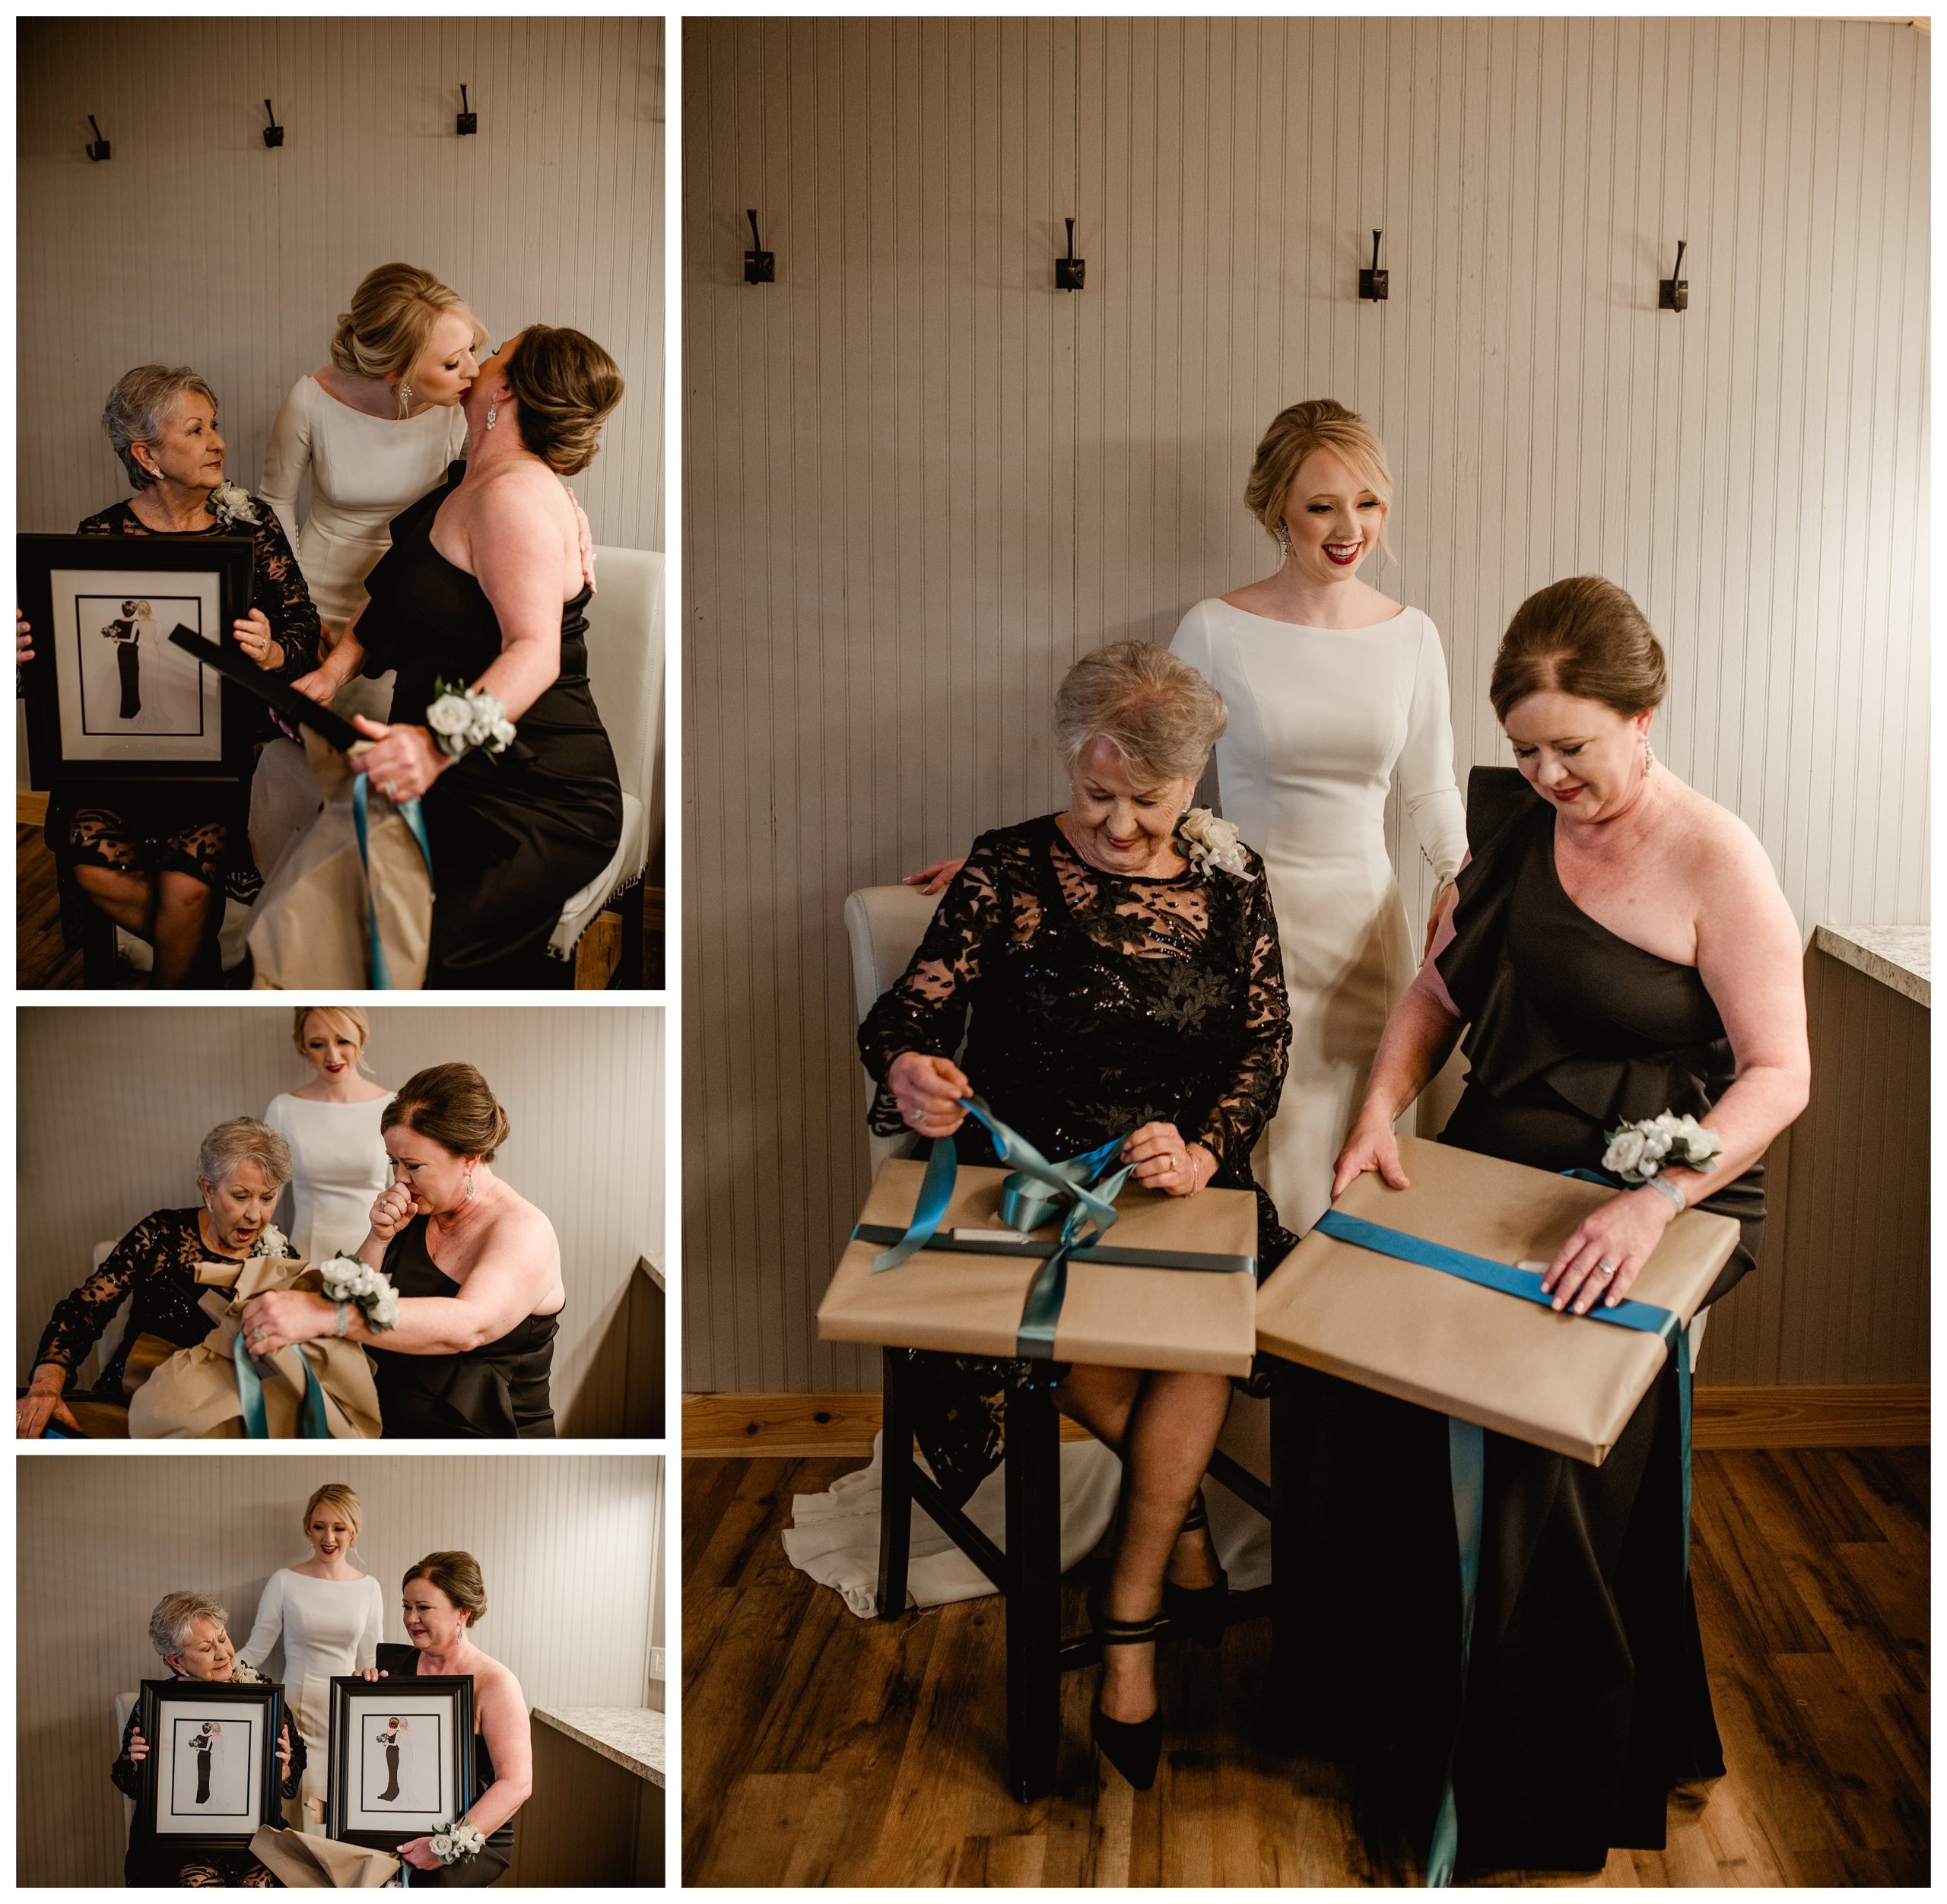 Bride gifts mother and grandmother drawings of her on wedding day - familiy gift ideas - Shelly Williams Photography